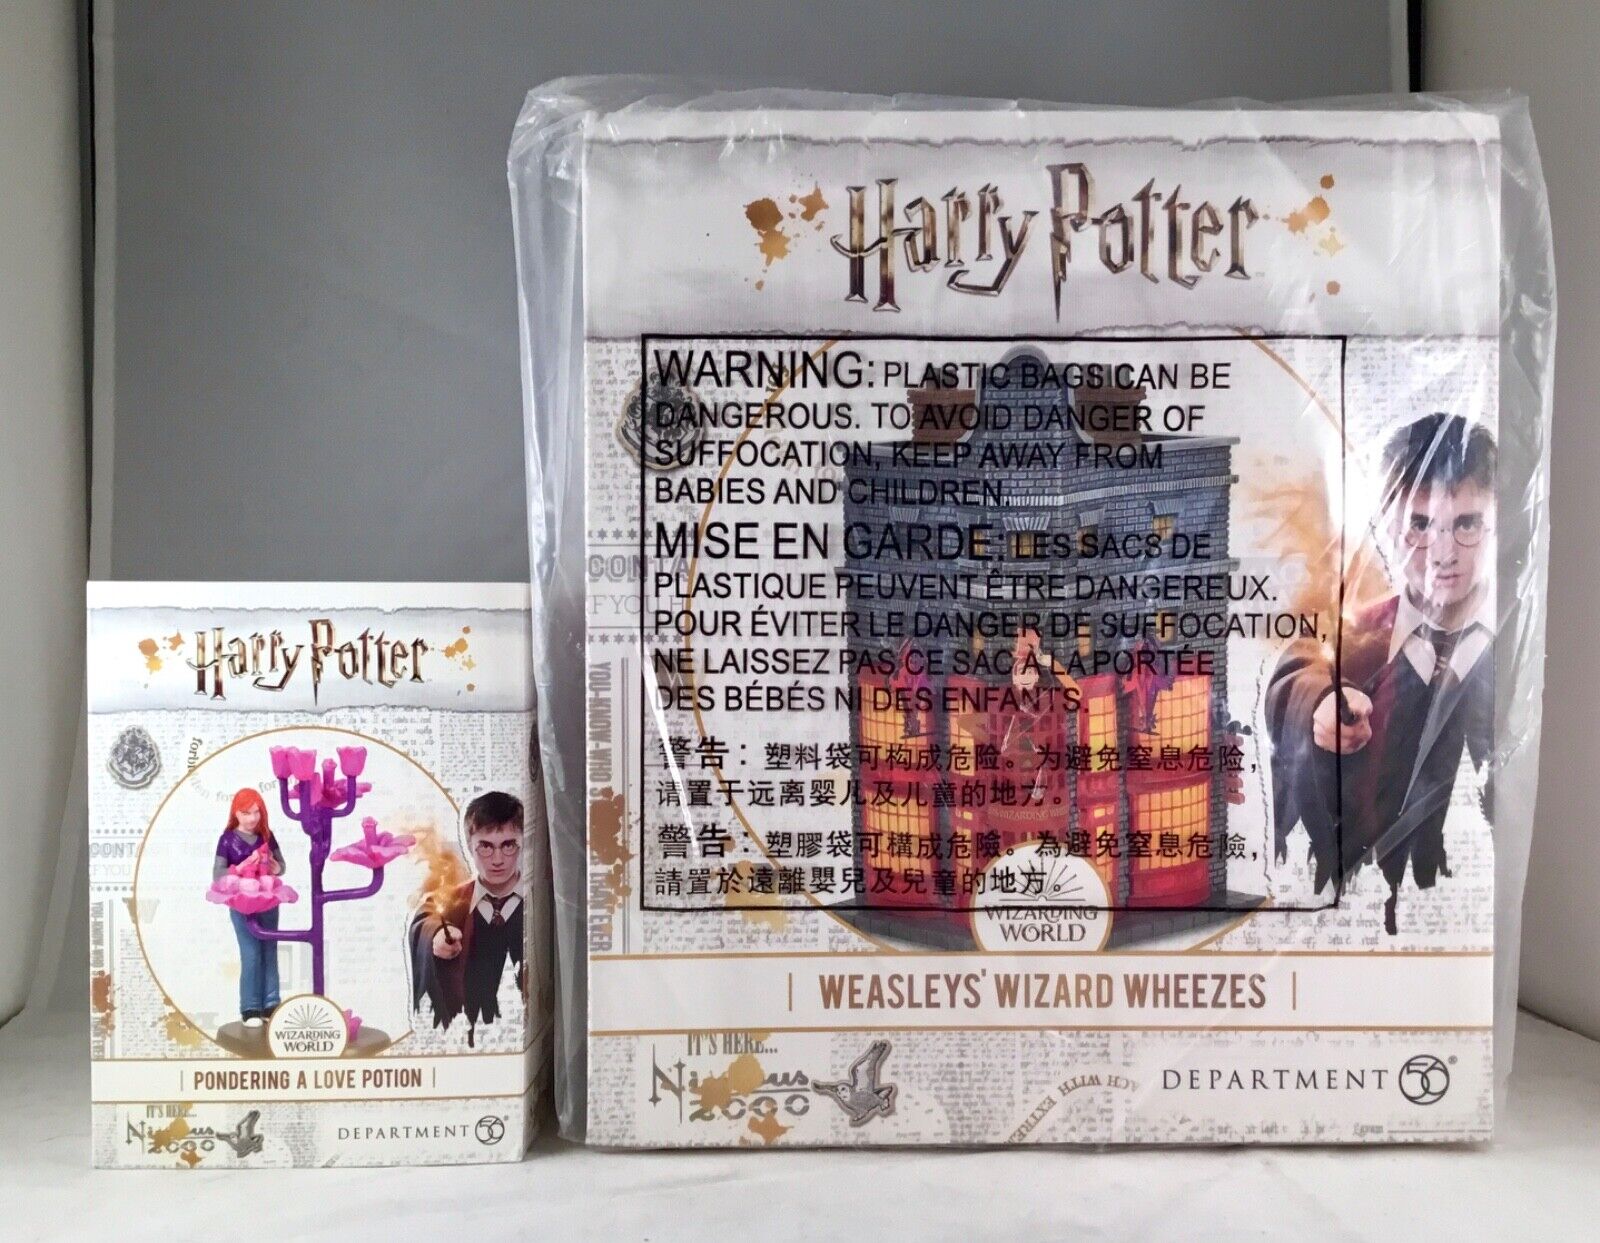 Dept 56 Lot of 2 WEASLEY'S WIZARD WHEEZES + PONDERING A LOVE POTION Harry Potter Department 56 6005615